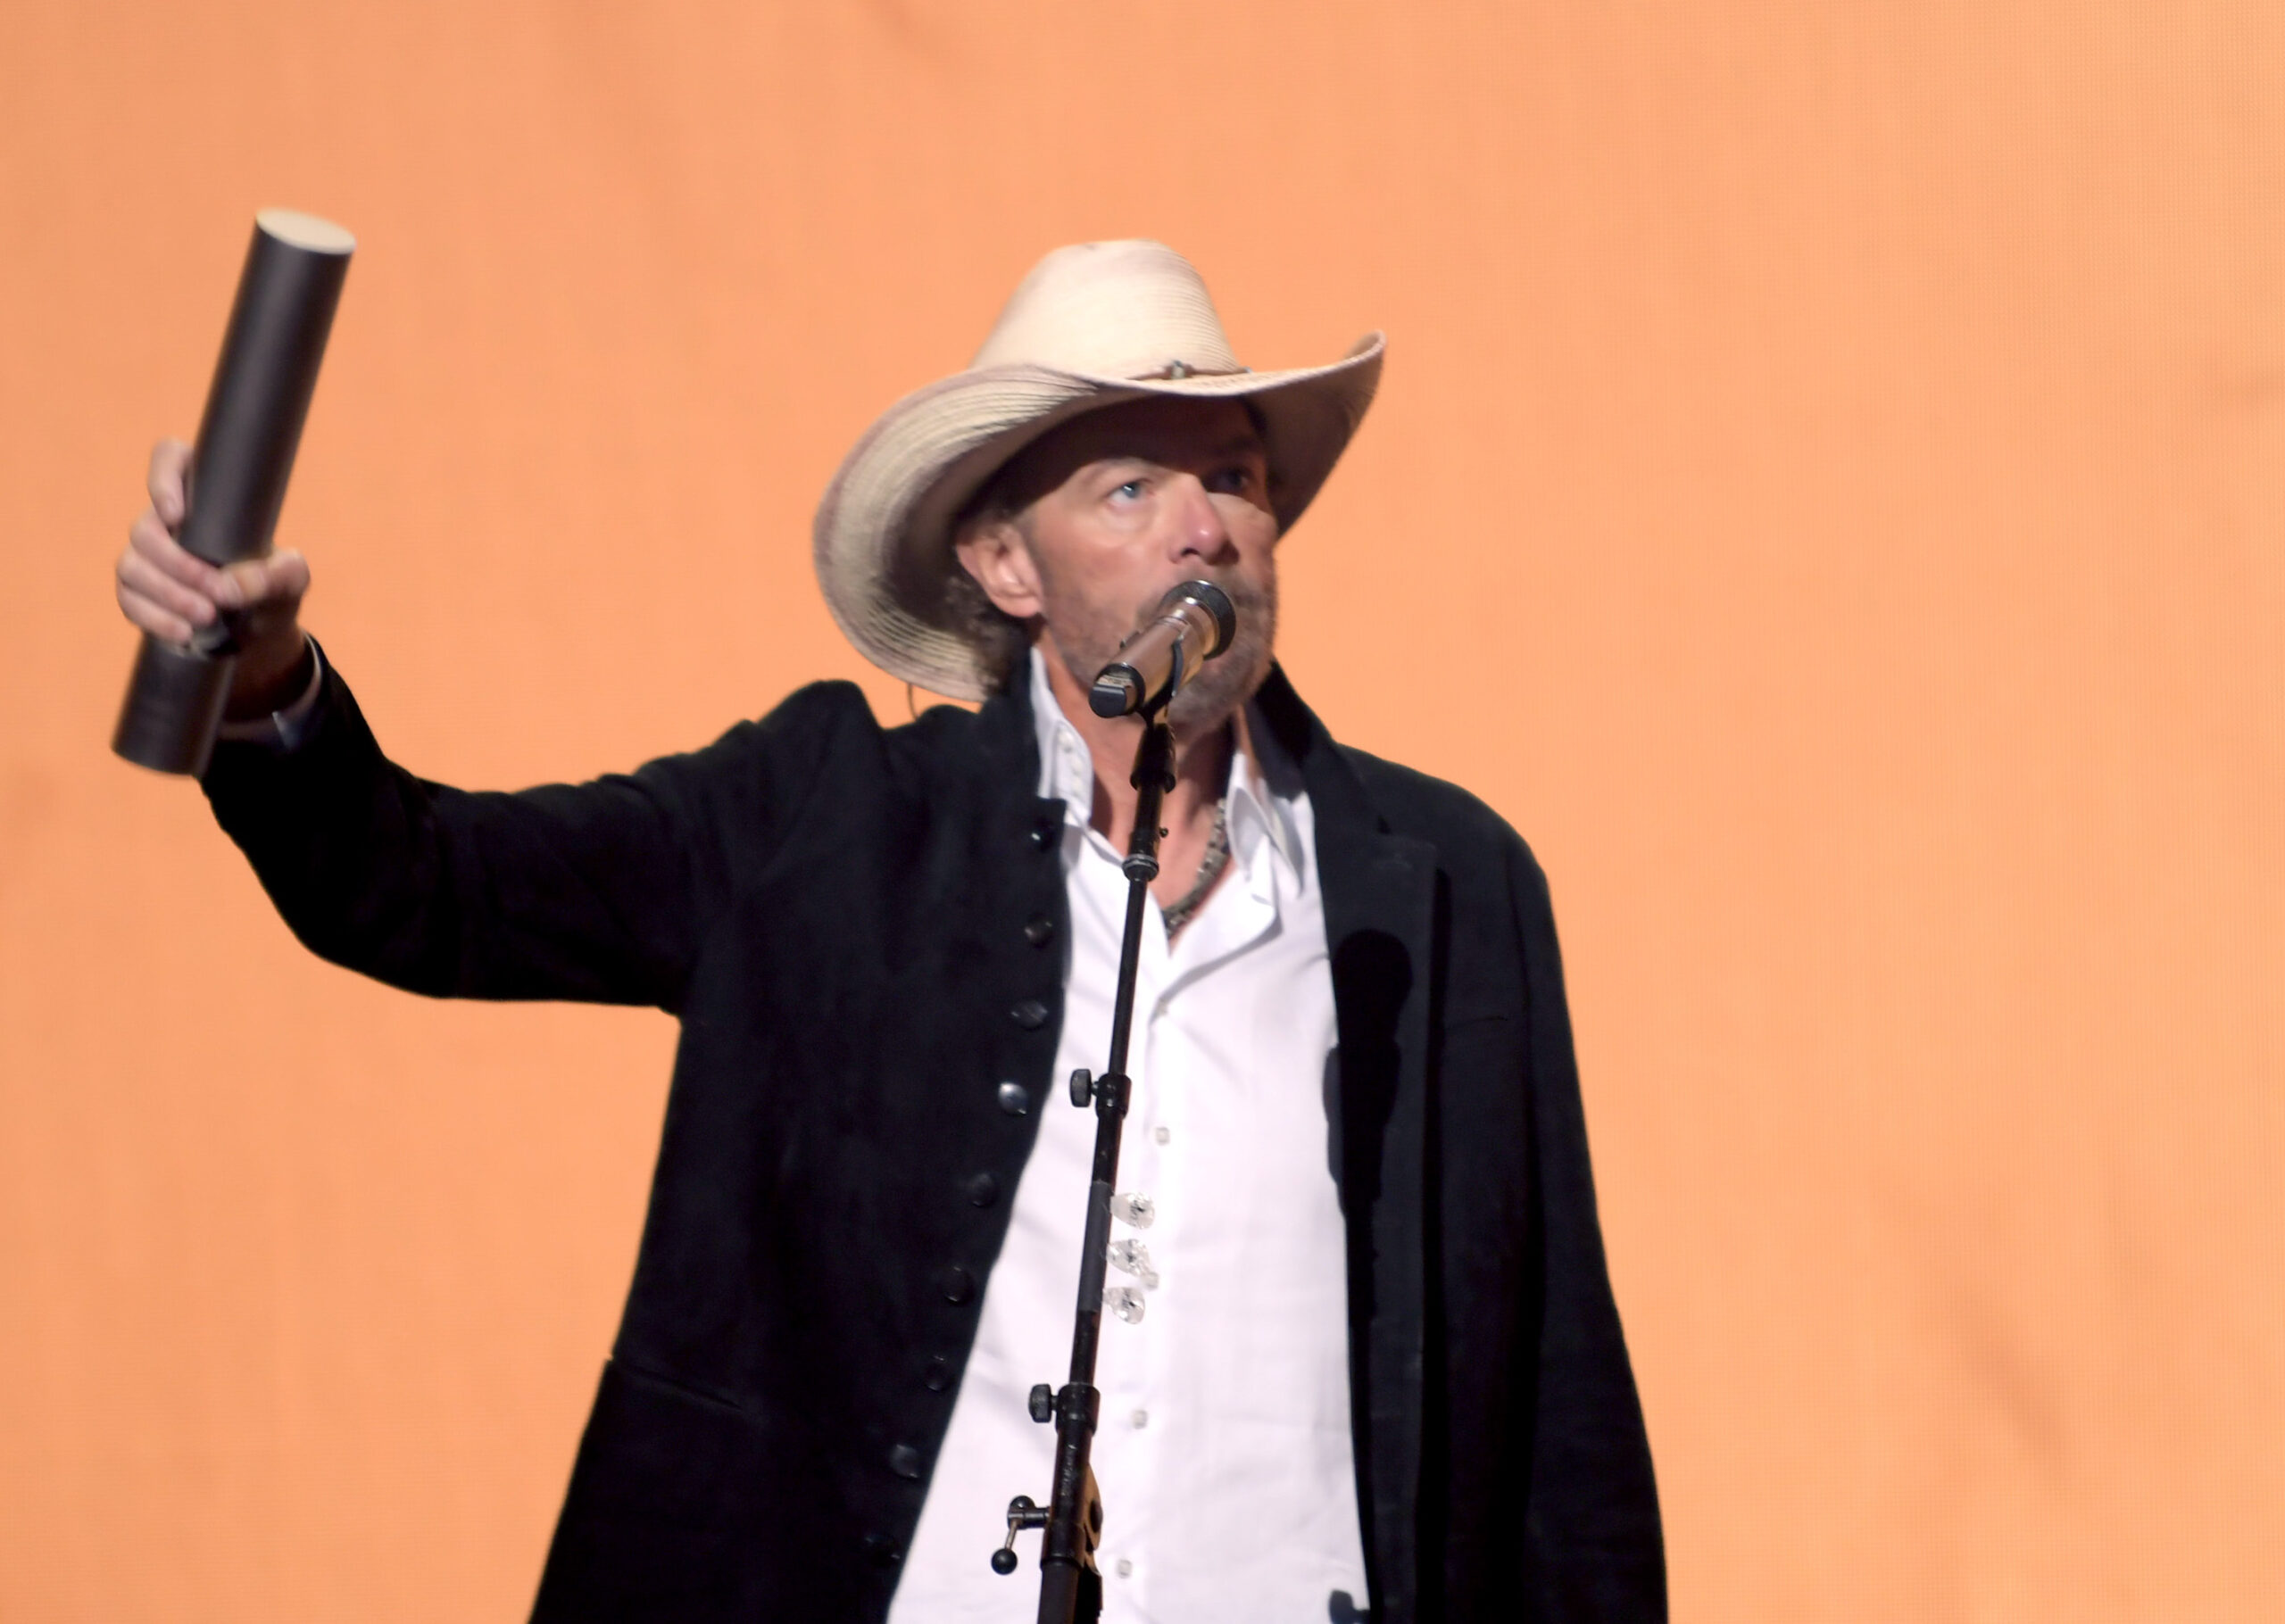 Toby Keith's faith was his 'rock' following stomach cancer